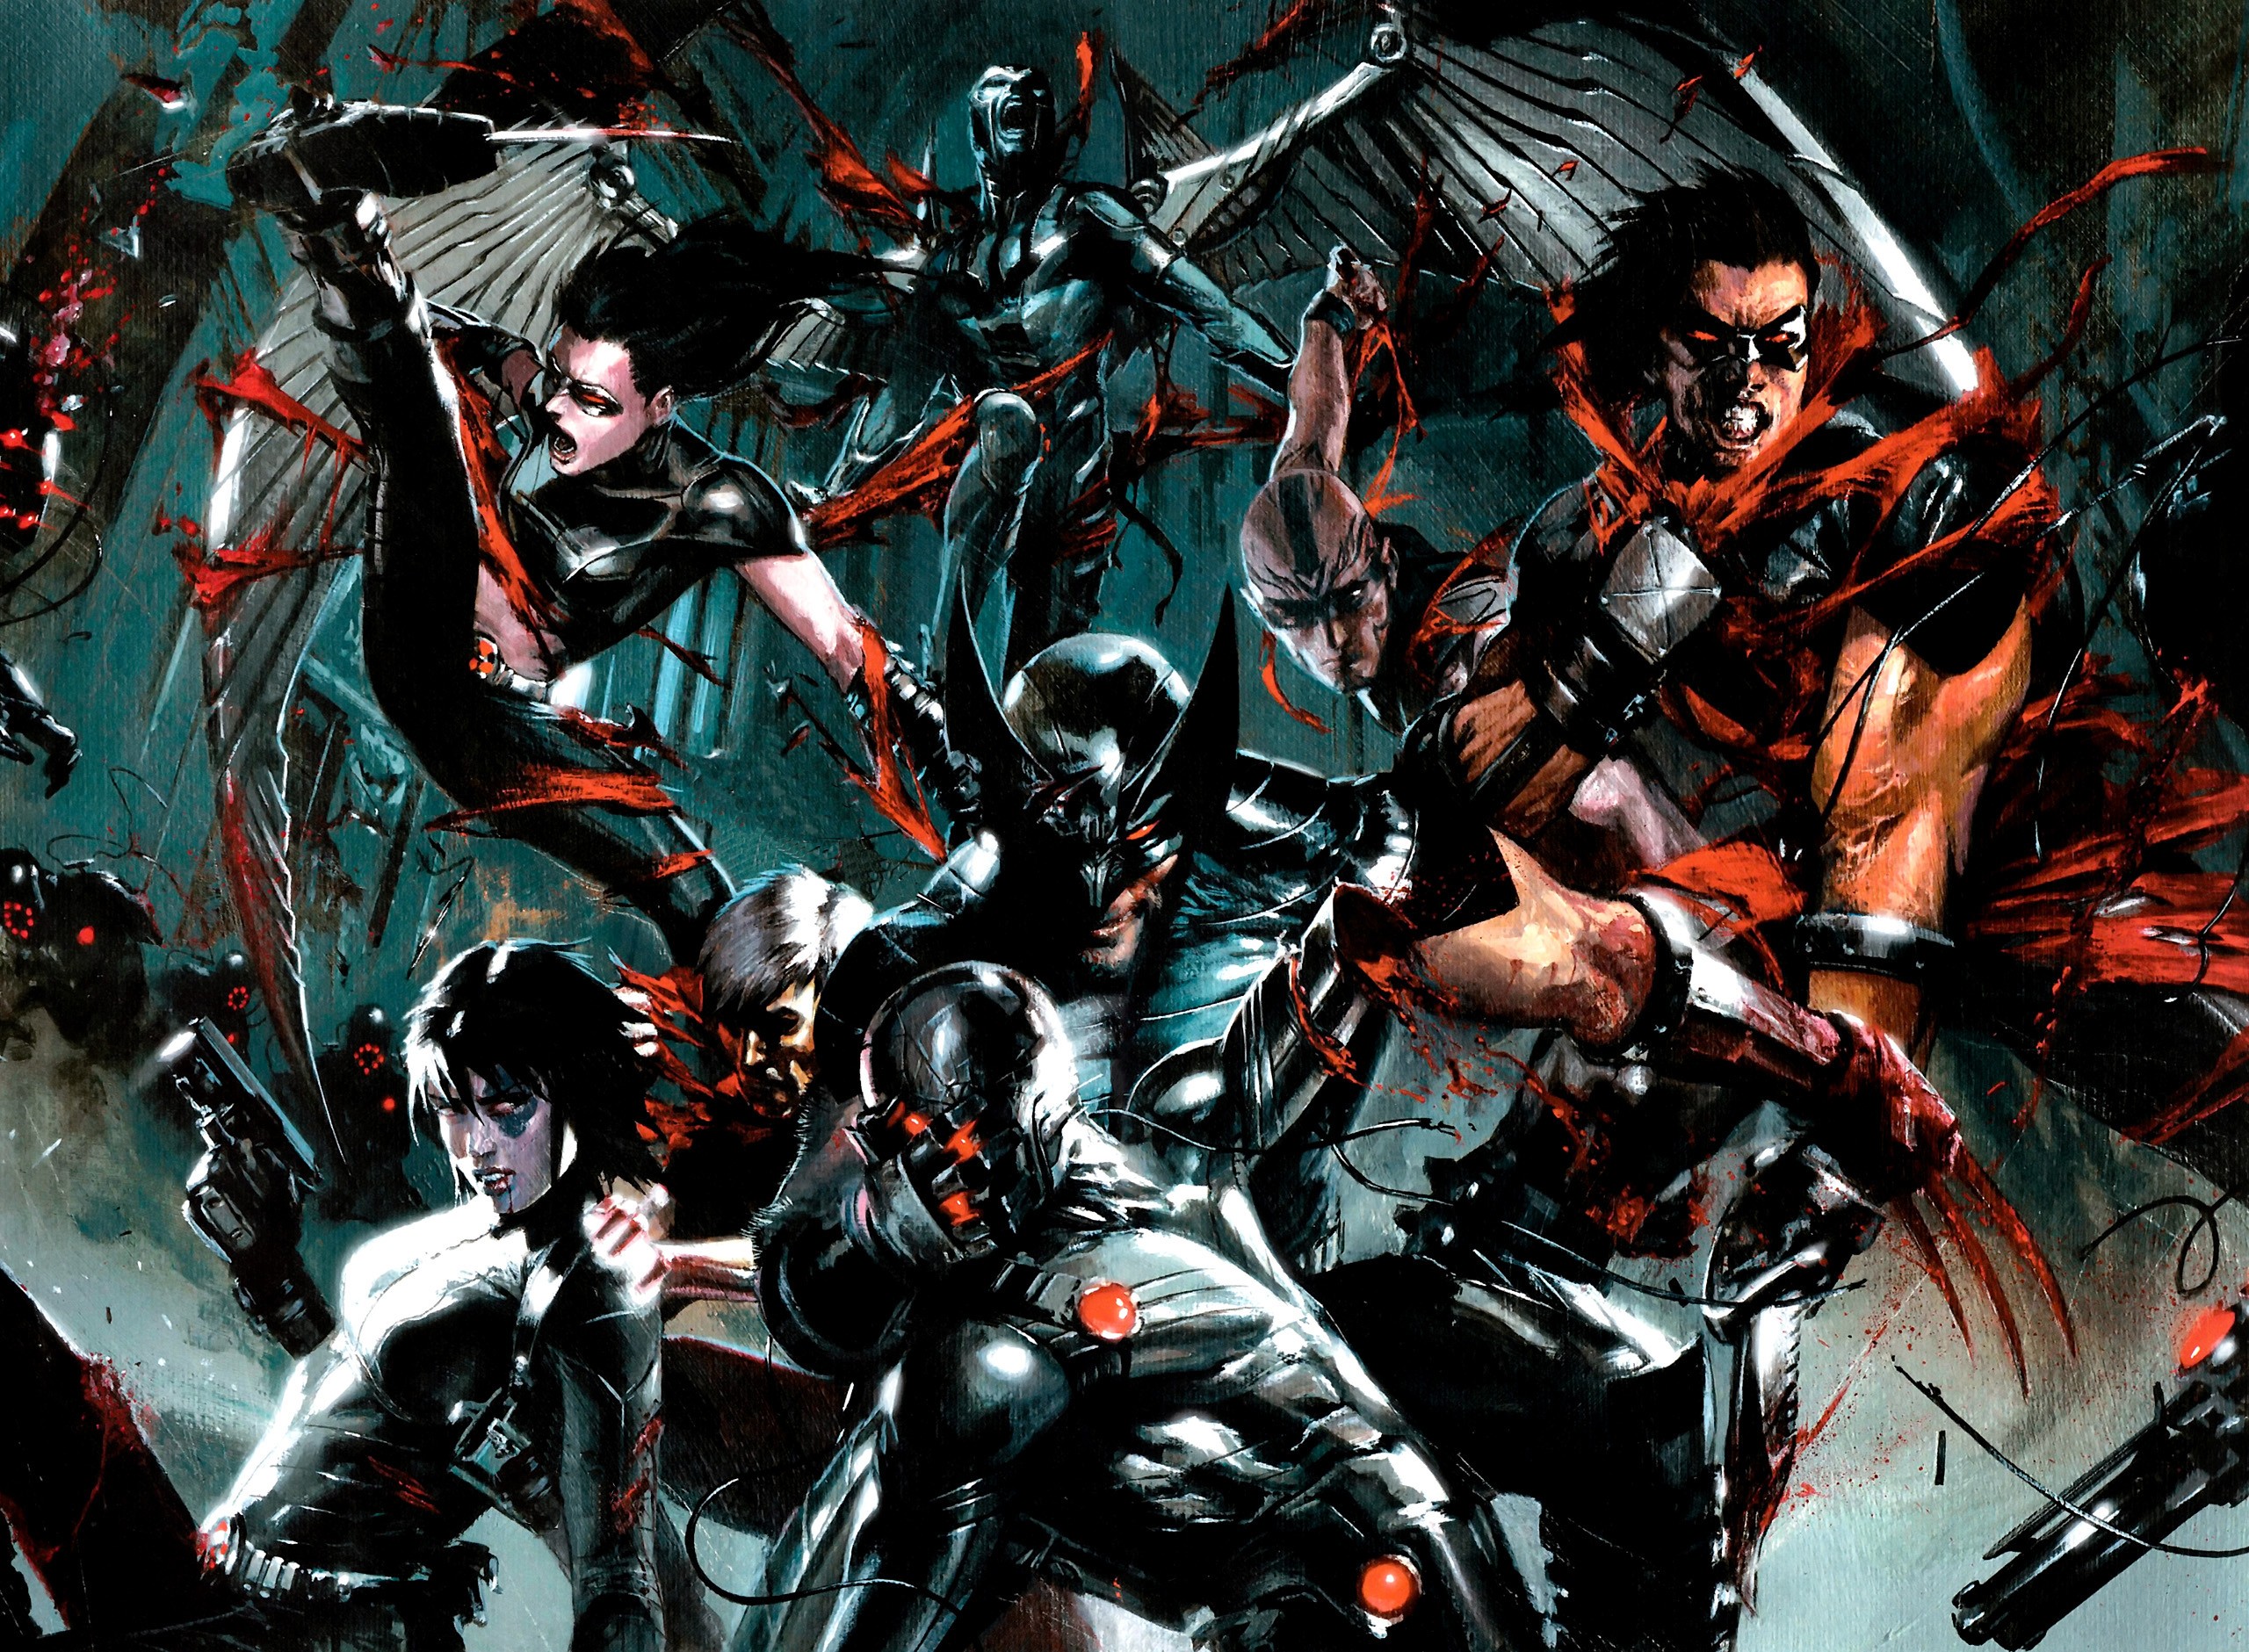 X-FORCE Already In The Works; Will Likely Feature 'X-23' As The New WOLVERINE